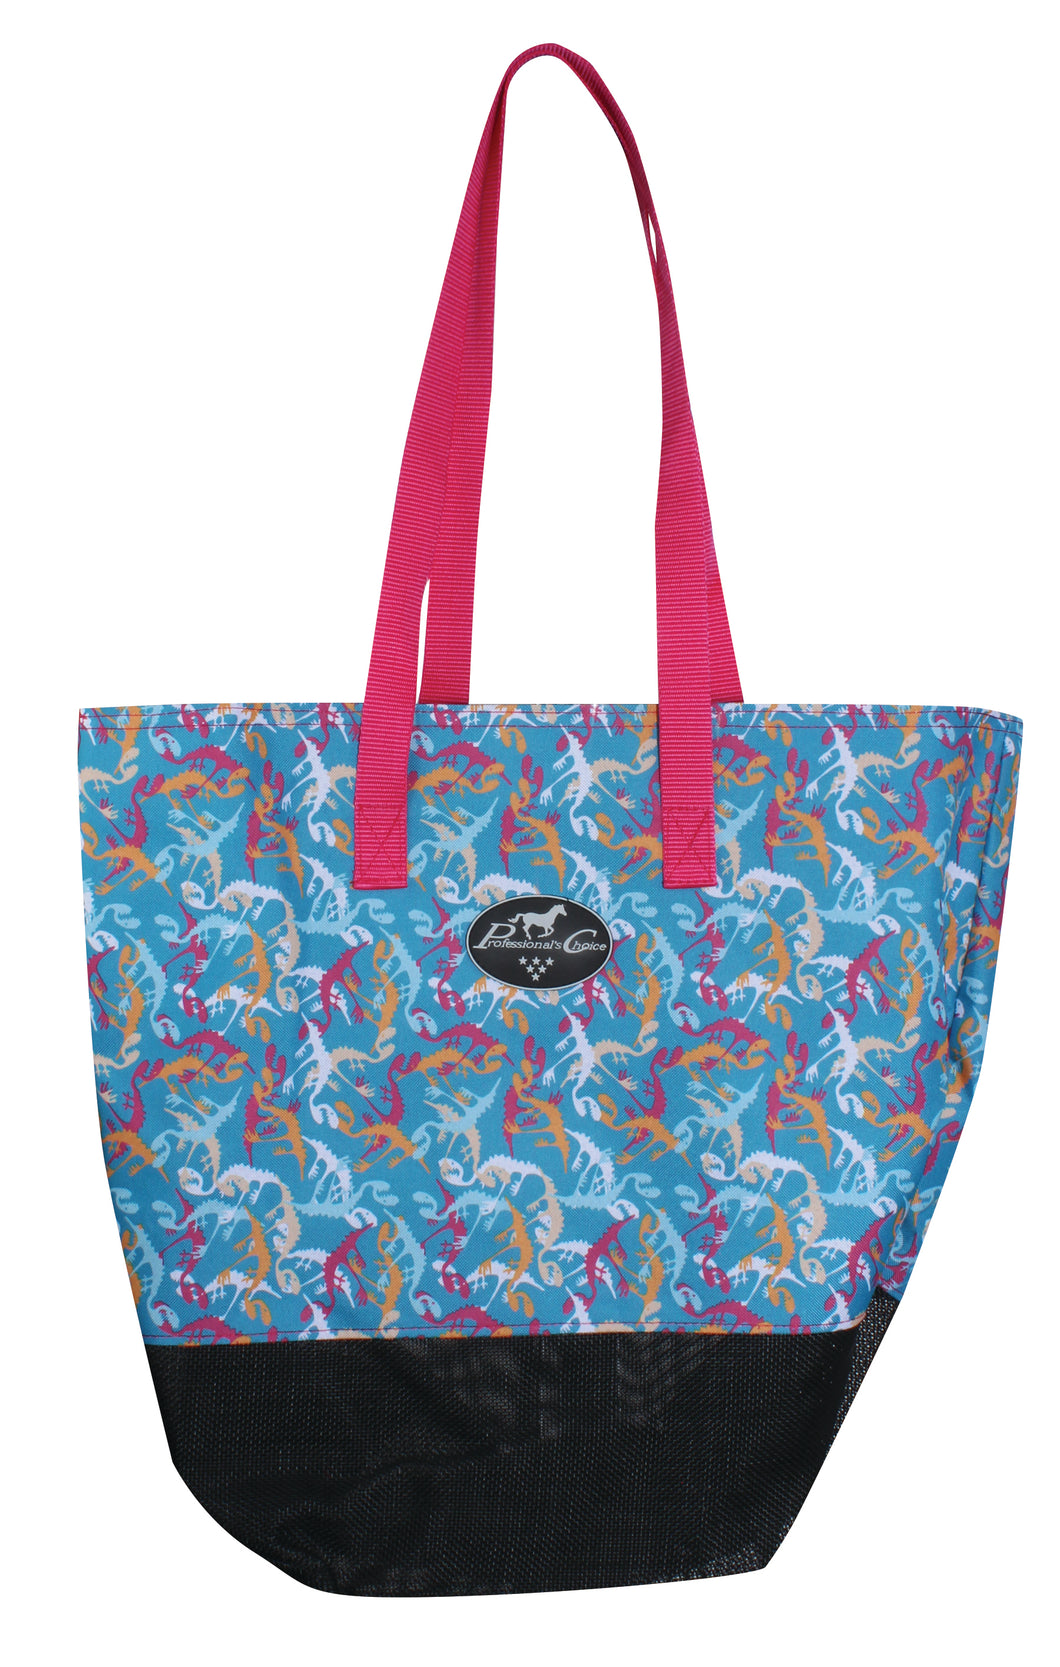 Pard's Western Shop Professional's Choice Tote Bags in Assorted Designs - Bones